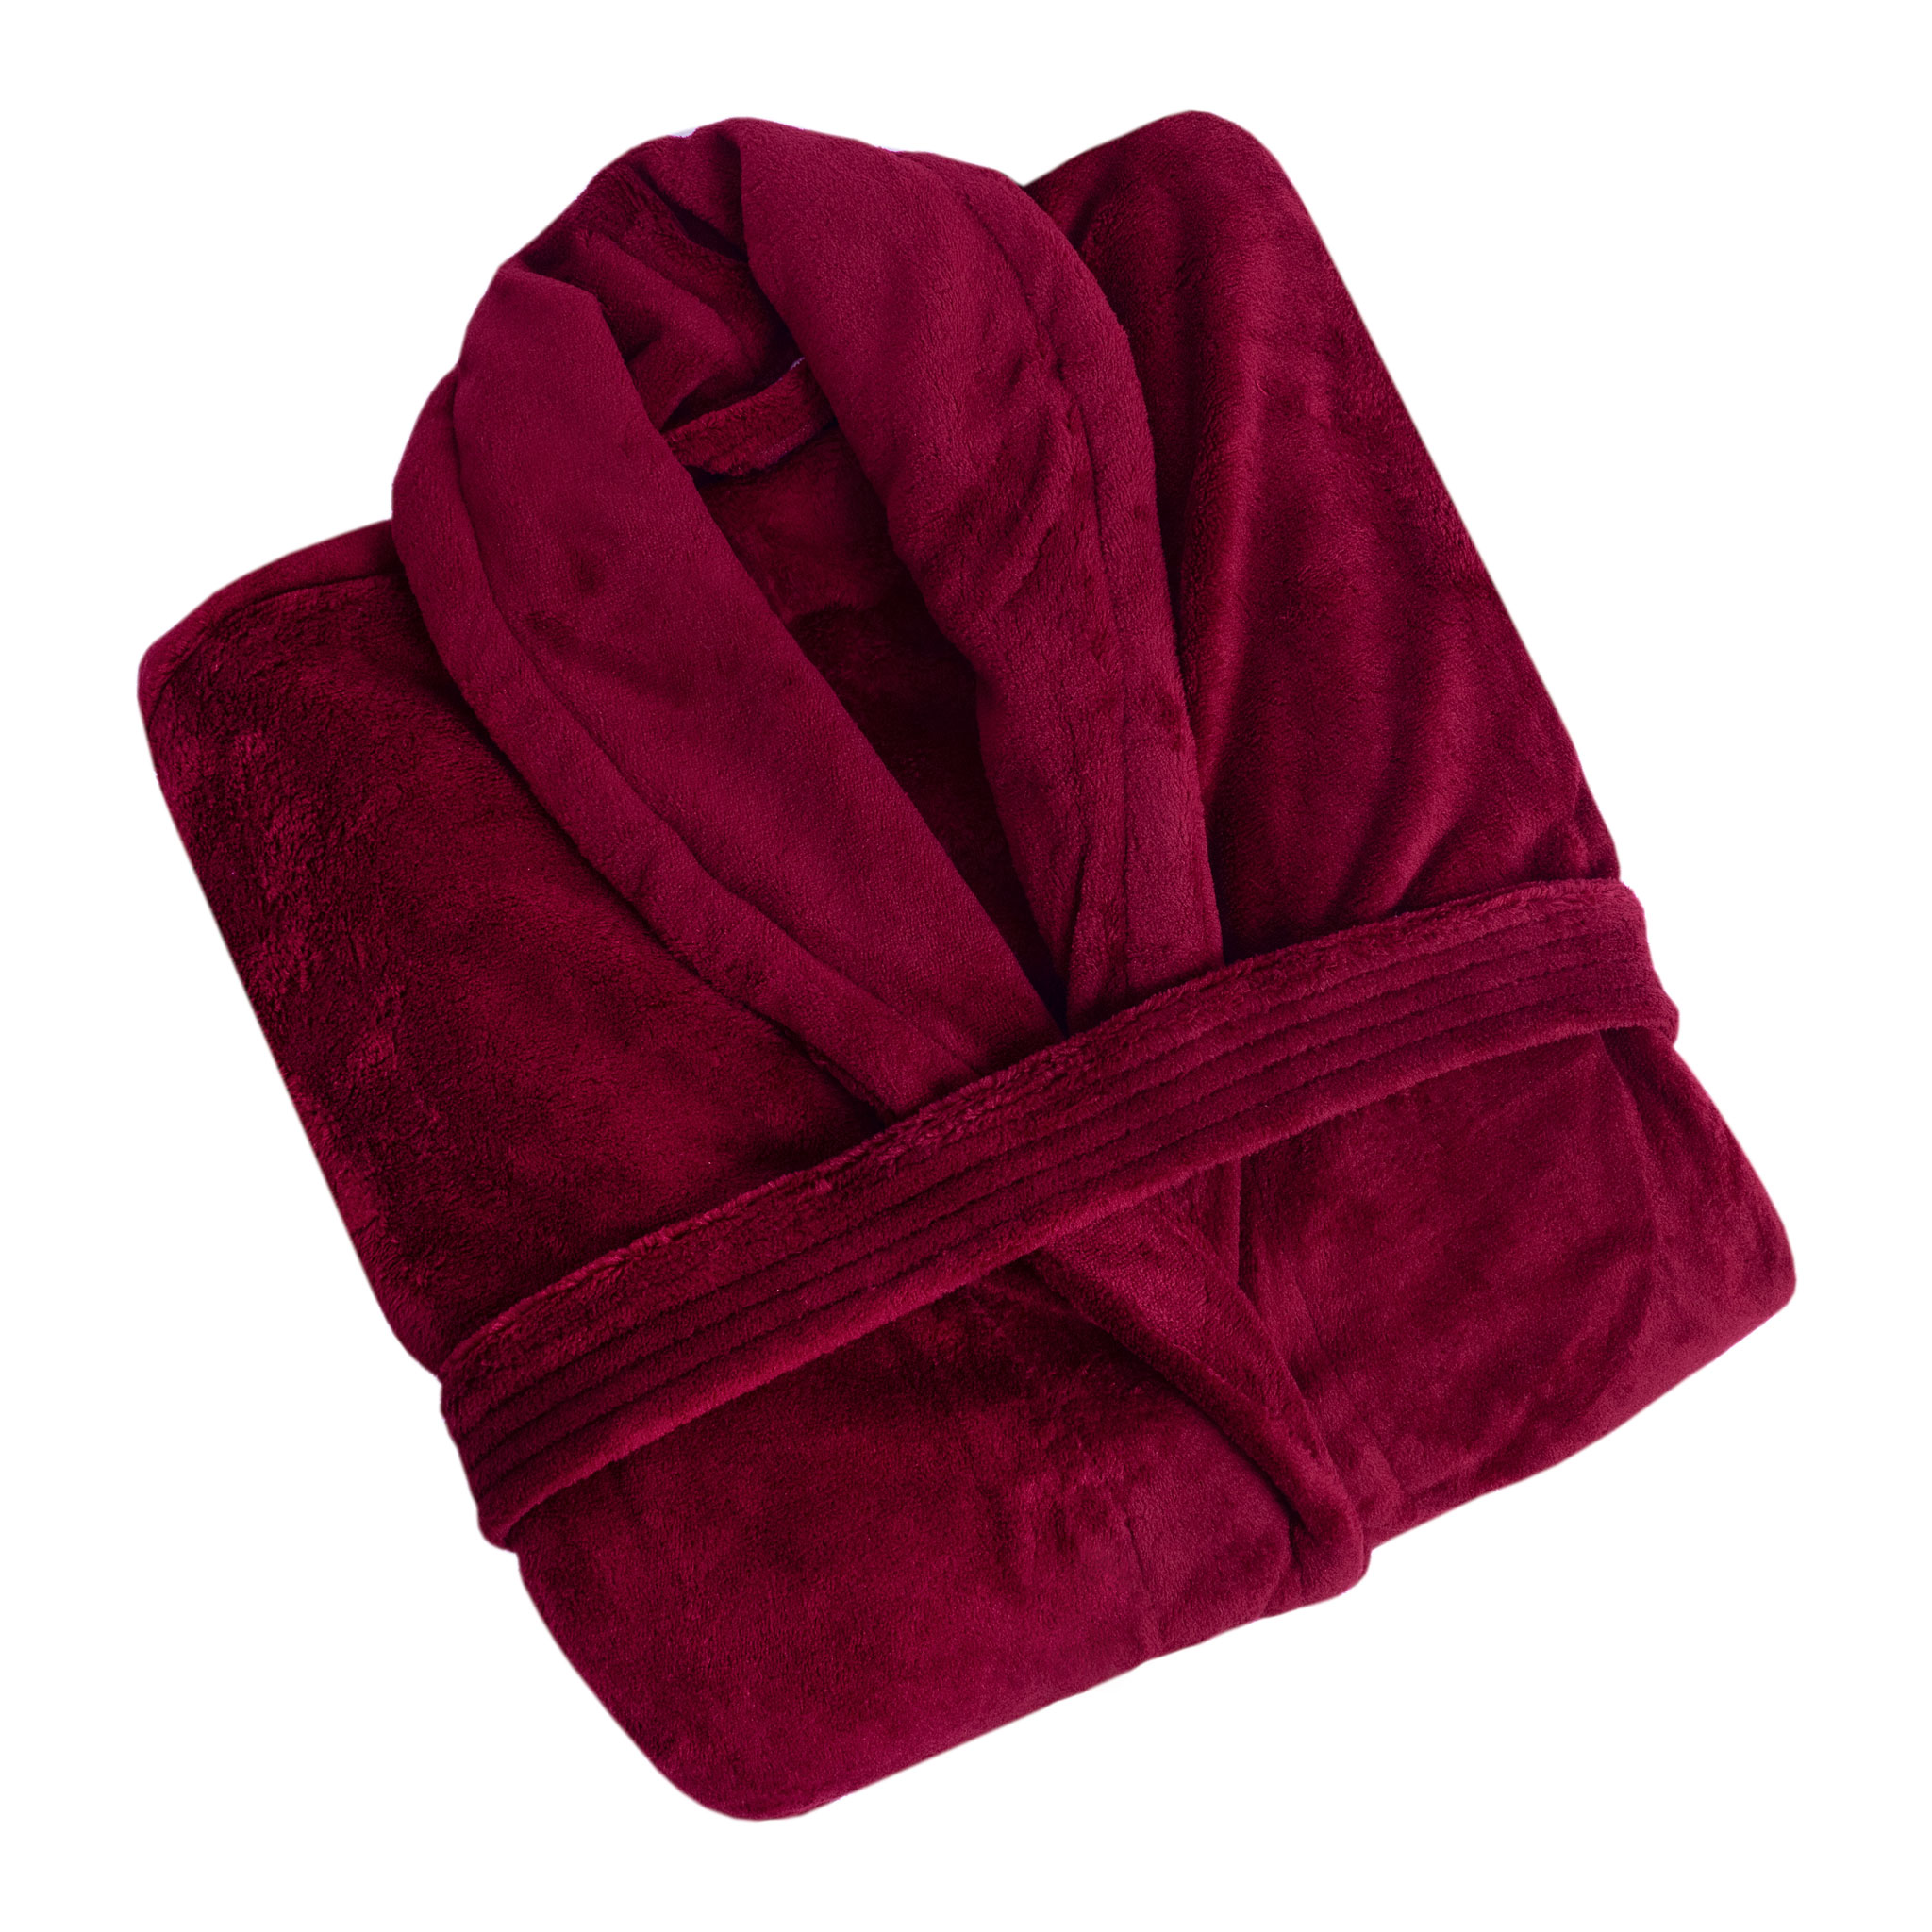 Coral Fleece Bathrobes – Jenev wholesale Towels and related goods